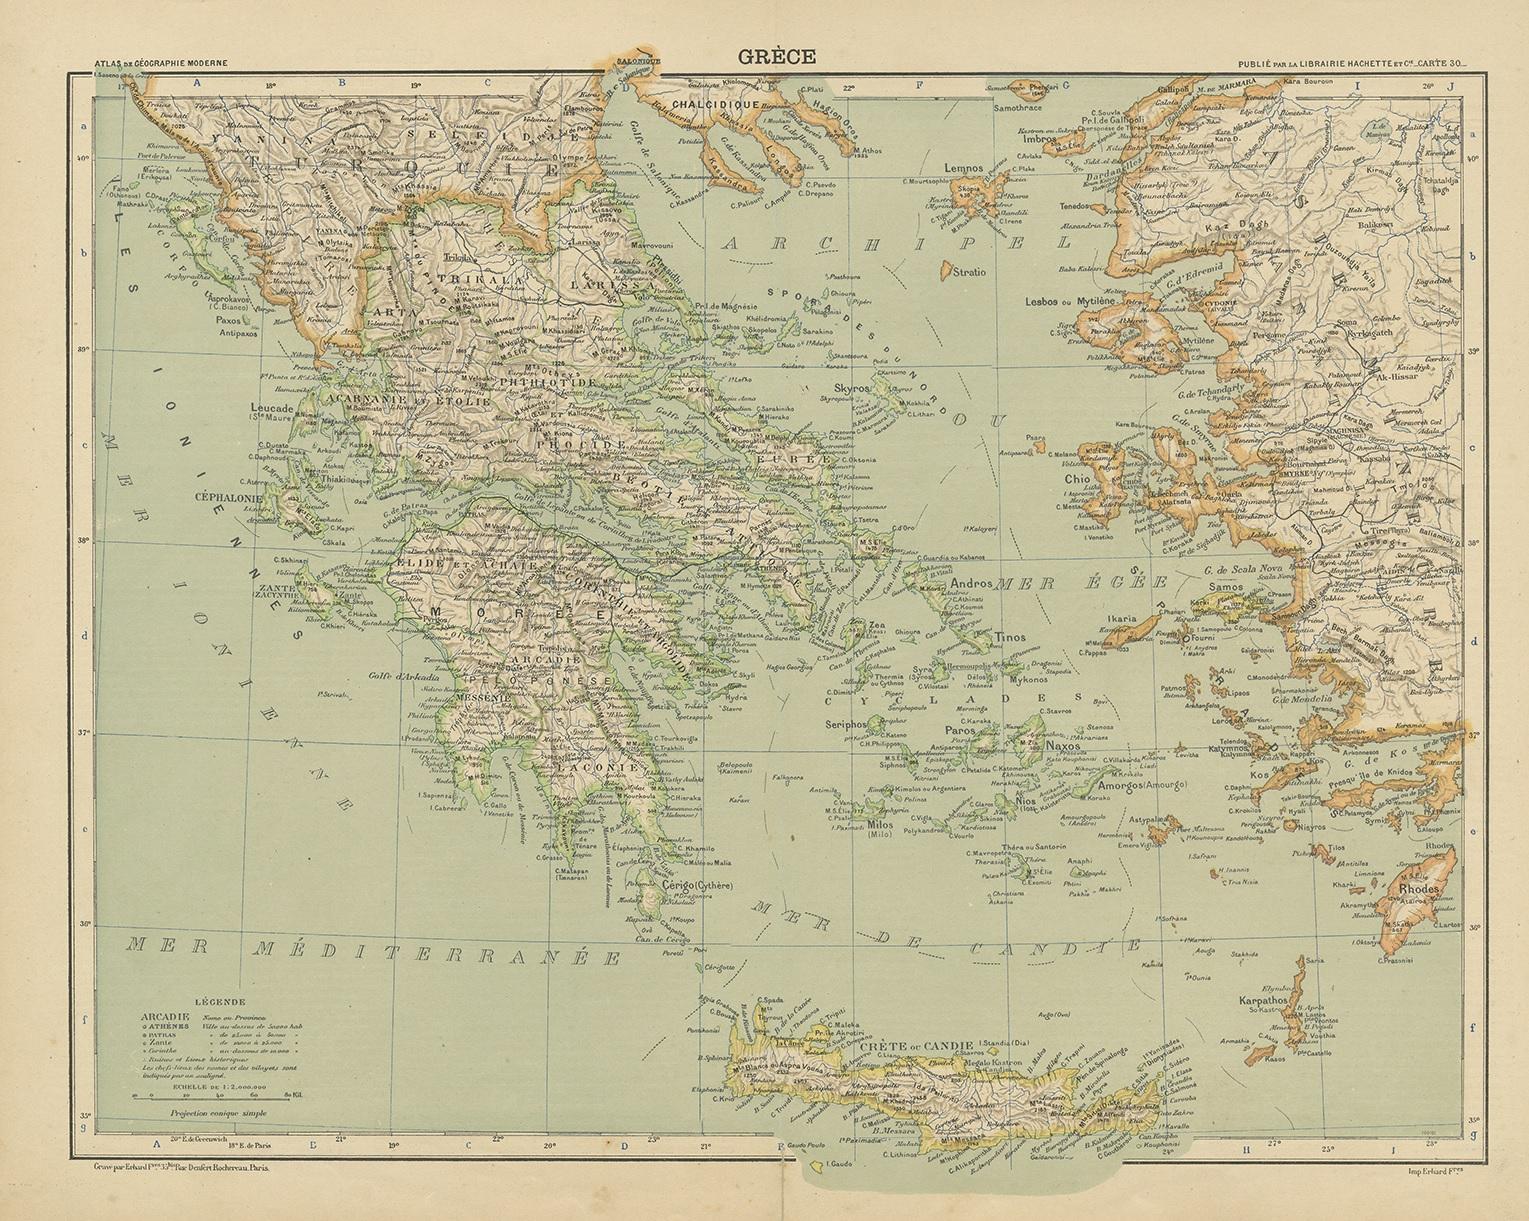 Antique map of Greece titled 'Grèce'. Old map of Greece and other parts of the Mediterranean including Crete and the Ionian Islands. This map originates from 'Atlas de Géographie Moderne'.